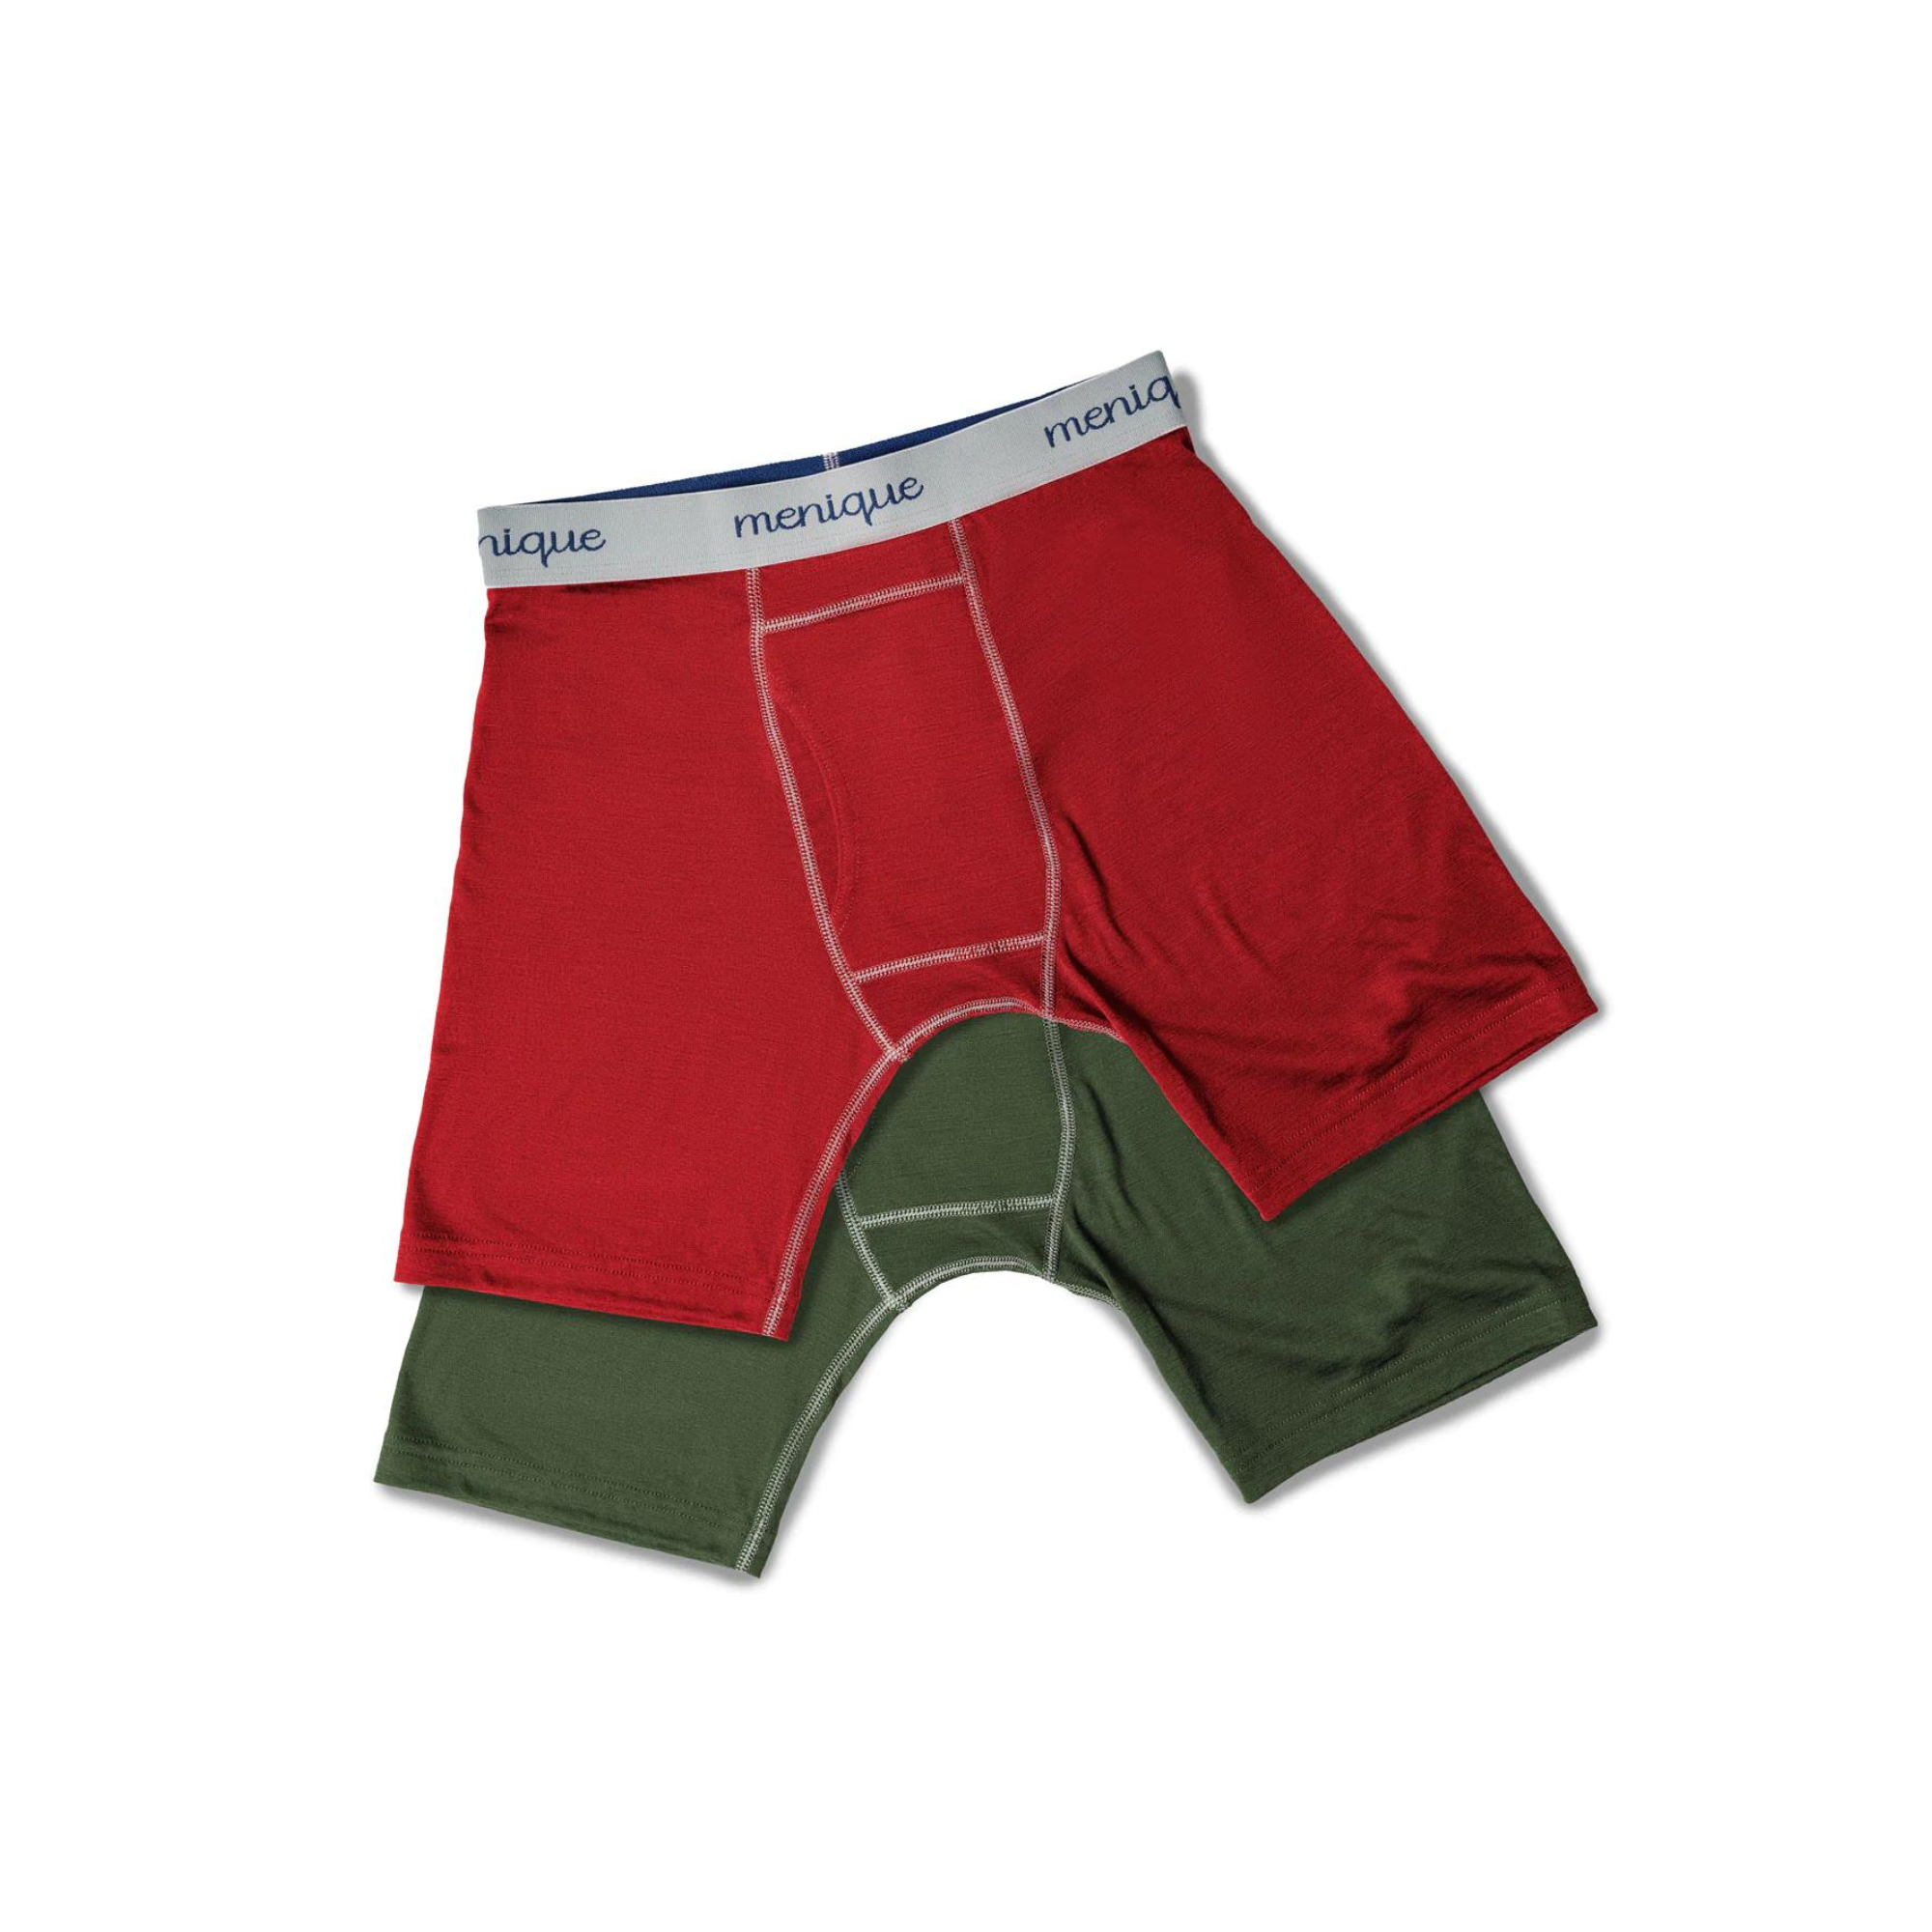 Pair of Thieves Men's SuperCool Boxer Briefs 2pk - Green/Red XL